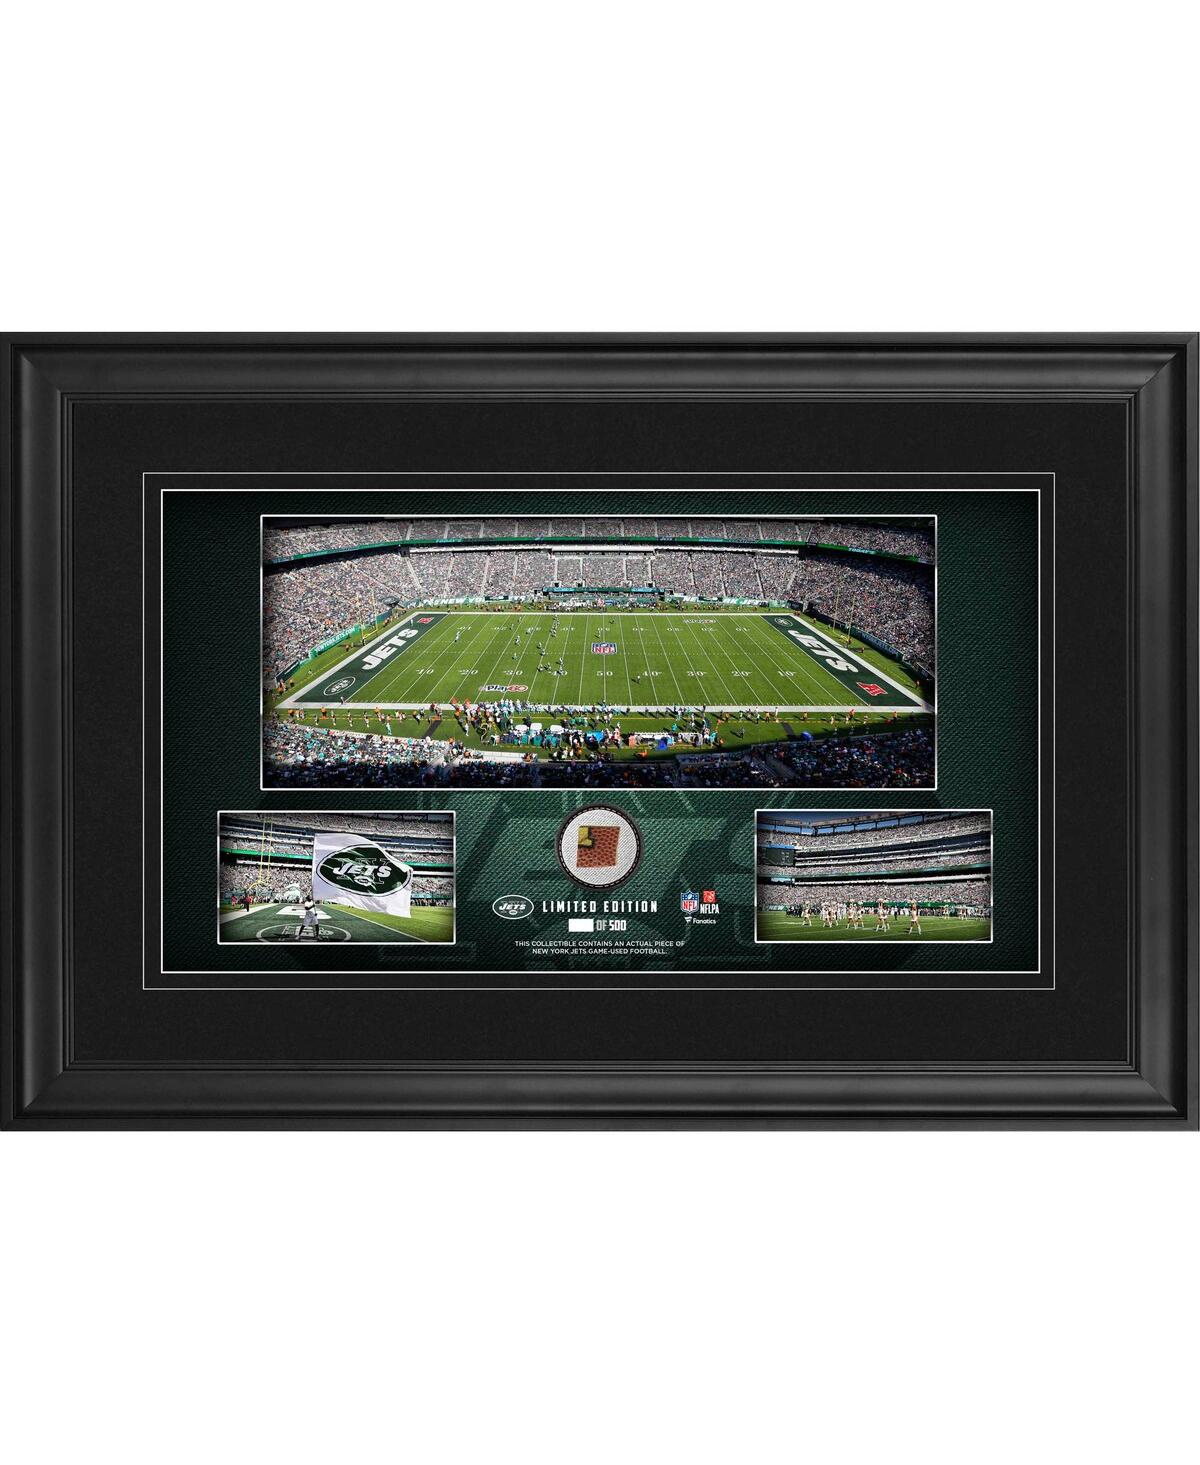 Fanatics Authentic New York Jets Framed 10" X 18" Stadium Panoramic Collage With Game-used Football In Black